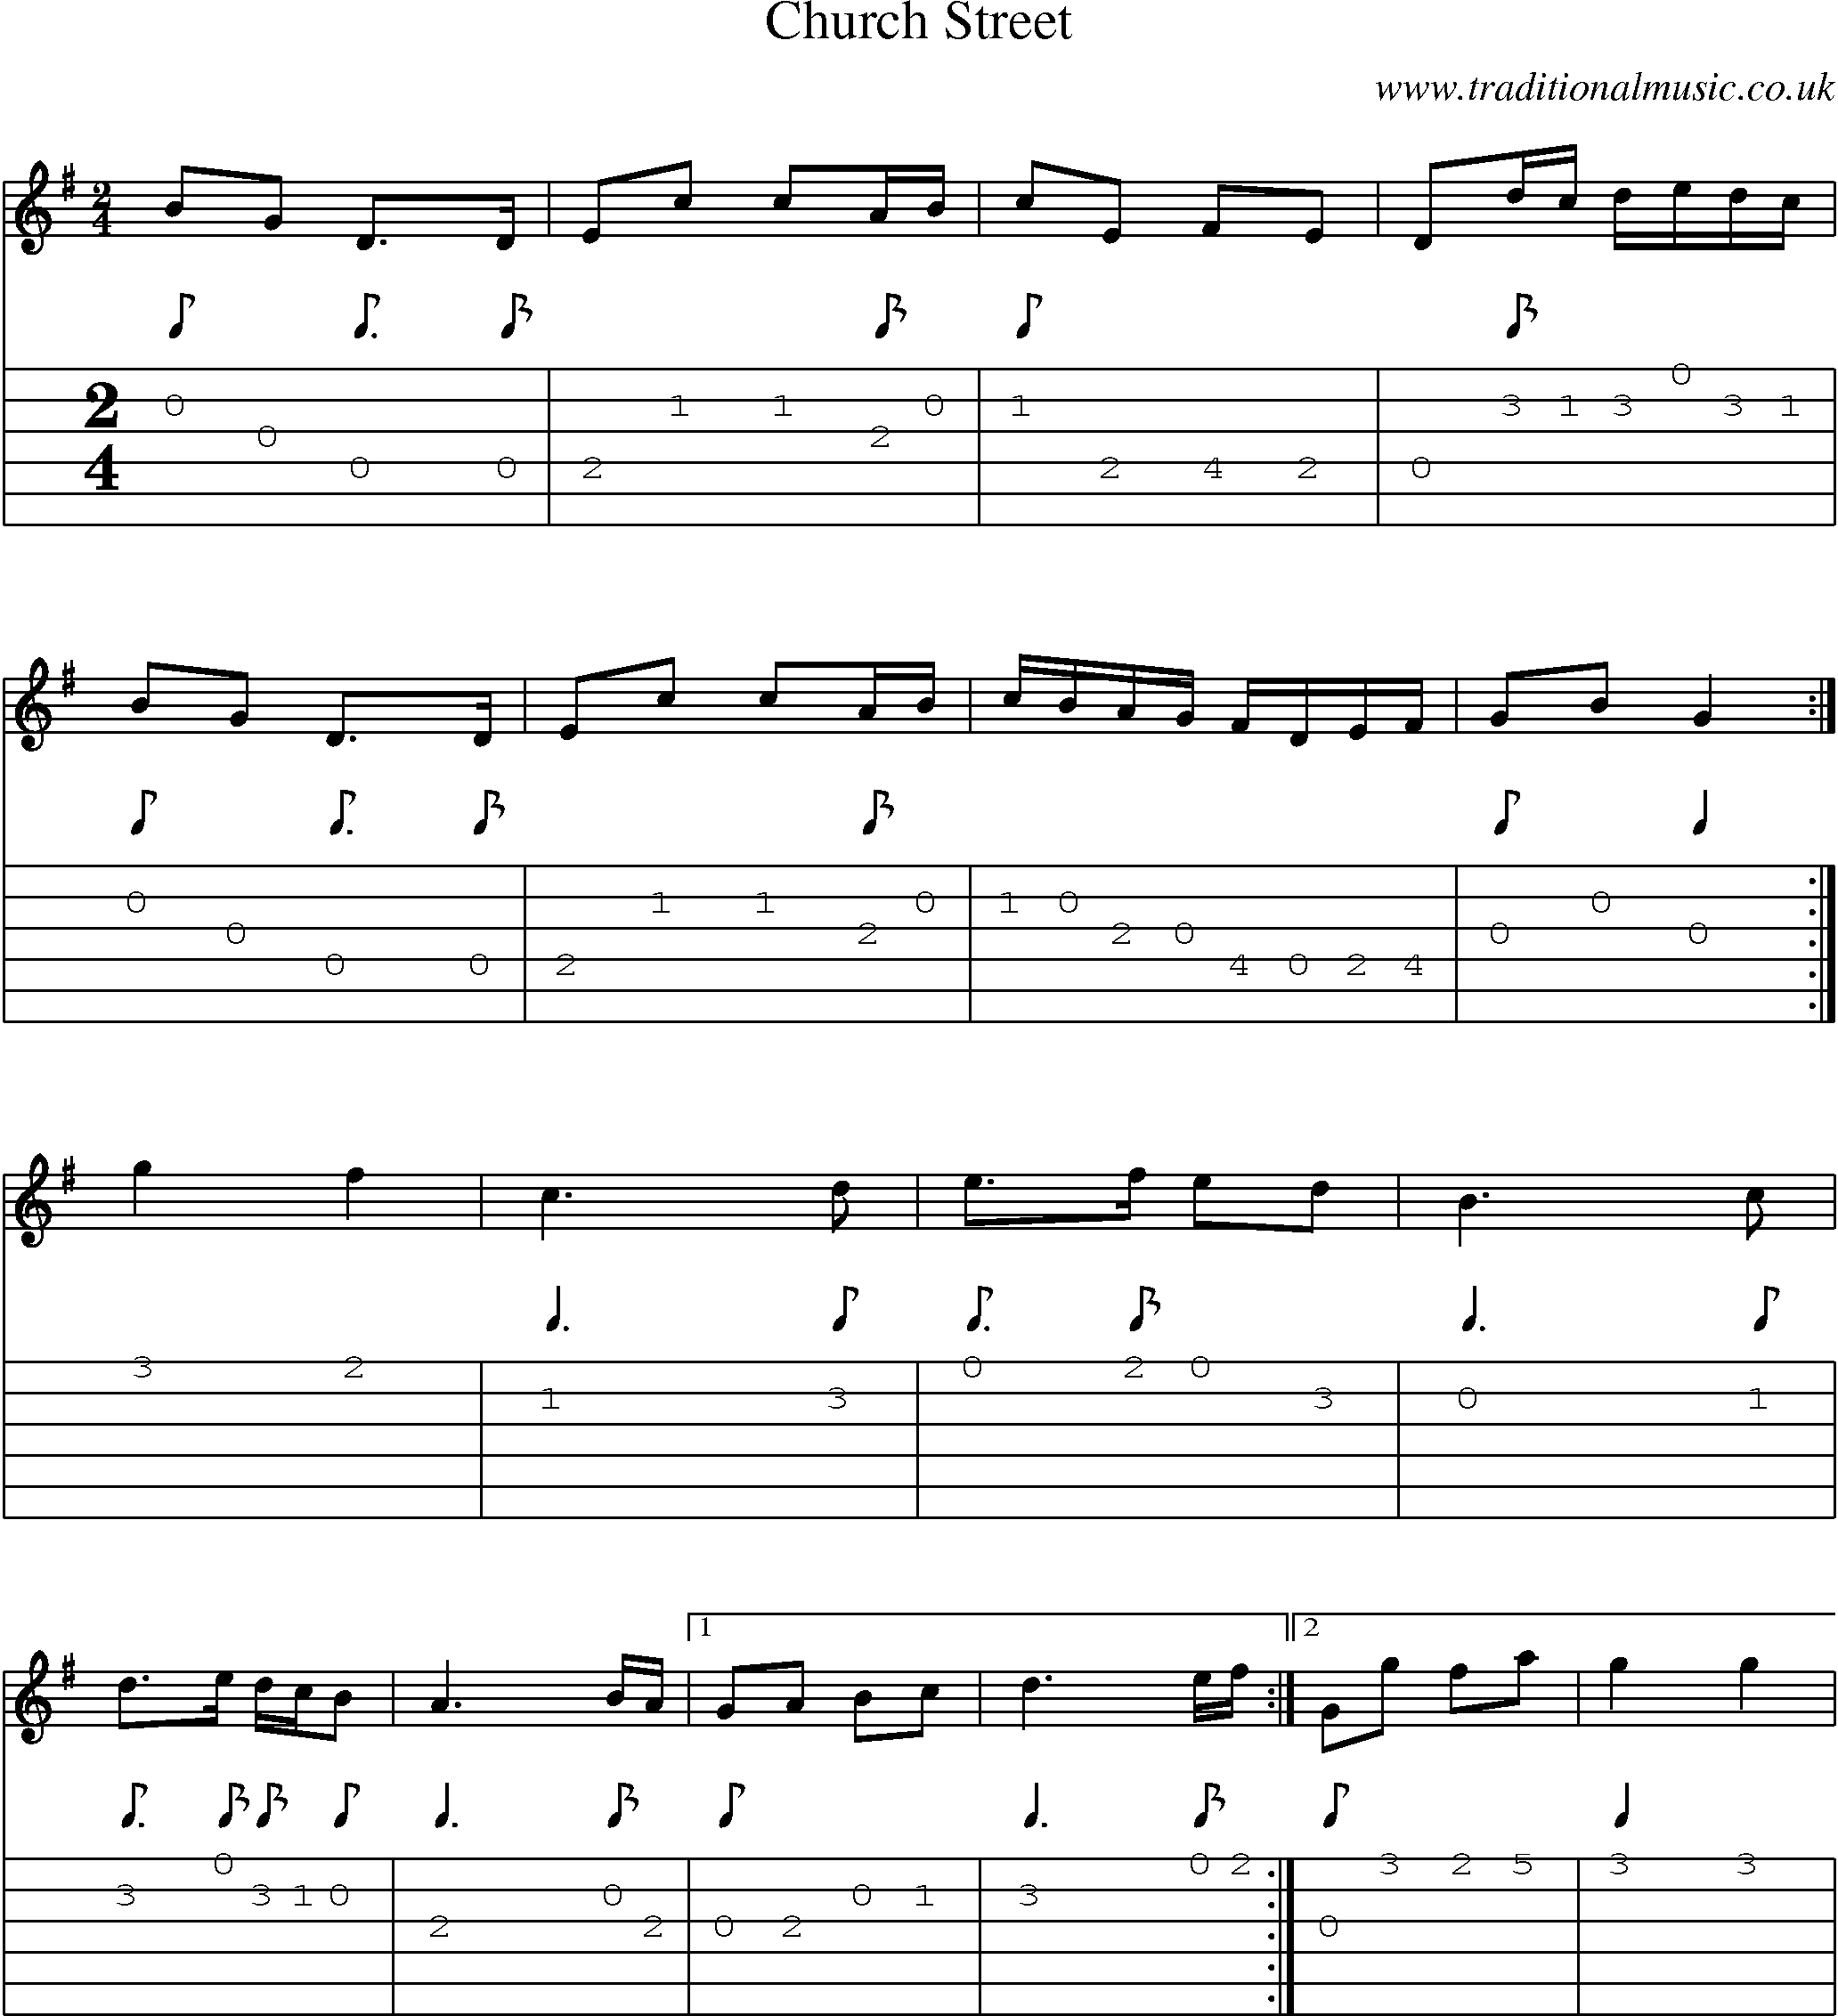 Music Score and Guitar Tabs for Church Street